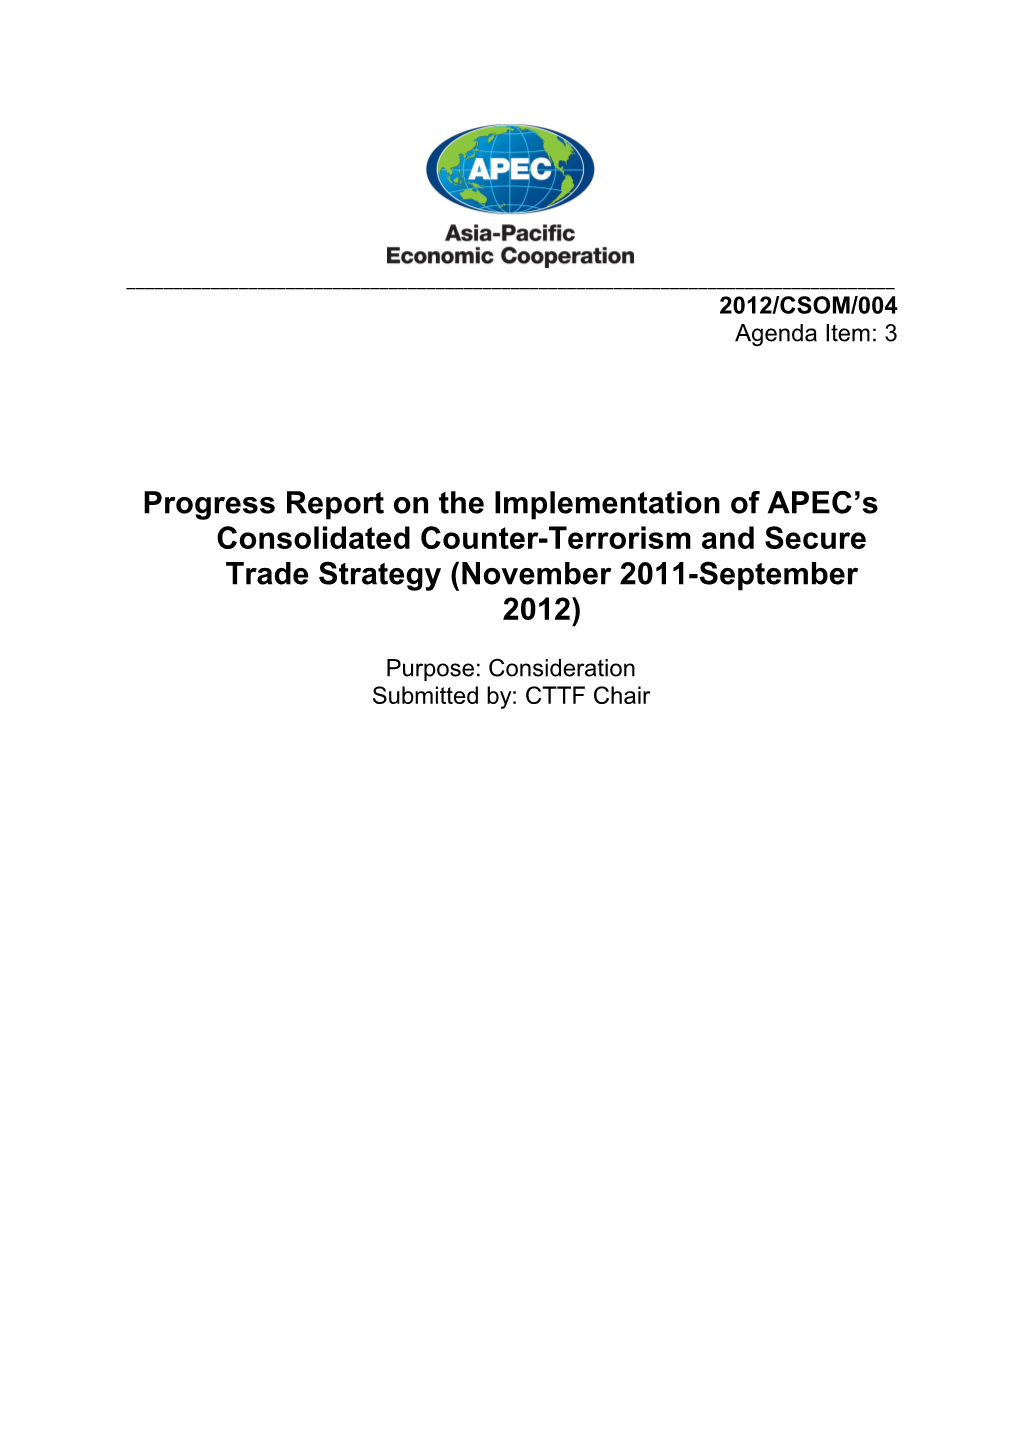 Progress Report on the Implementation of APEC S Consolidated Counter-Terrorism and Secure